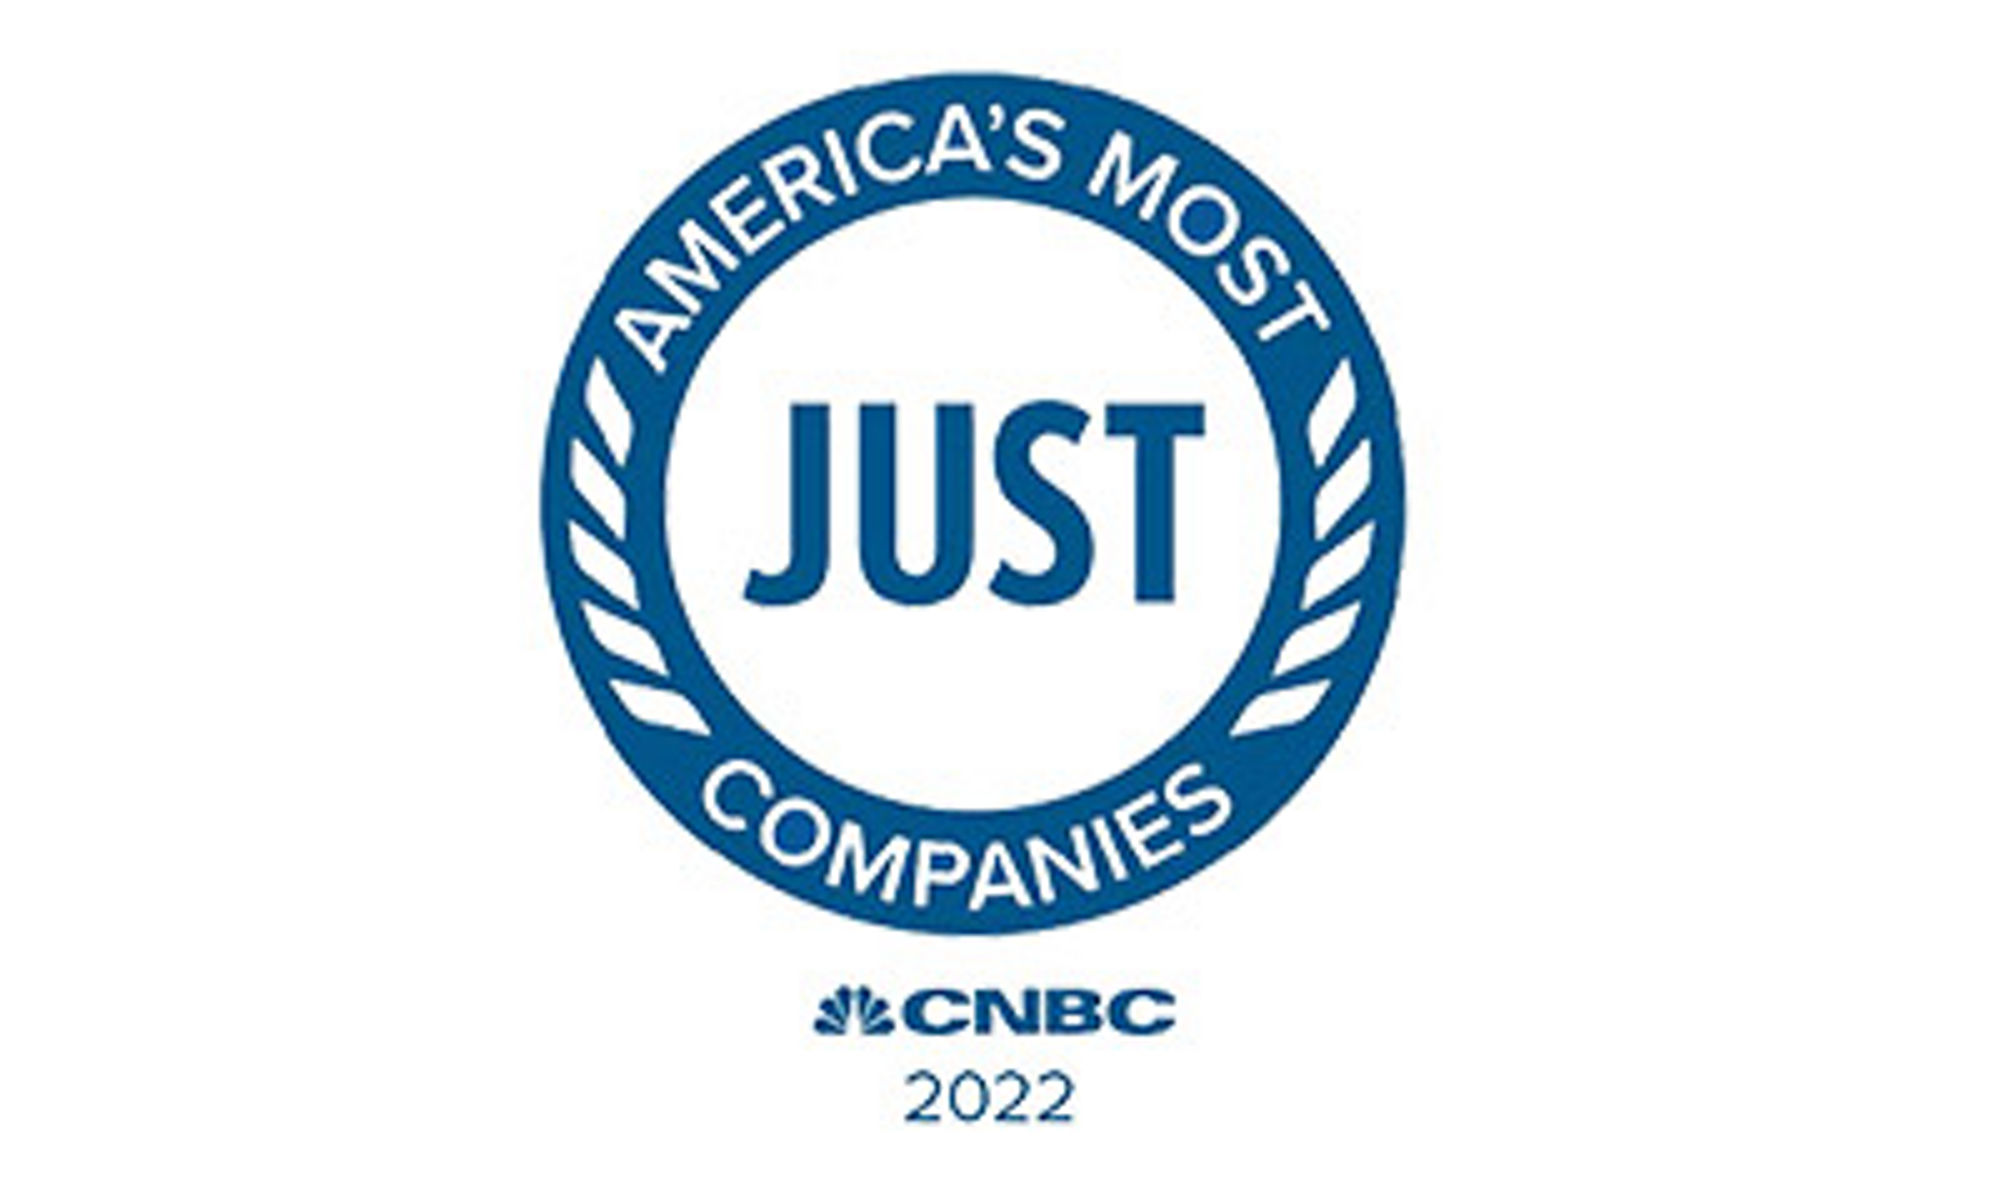 American's Most Just Companies CNBC 2022 logo